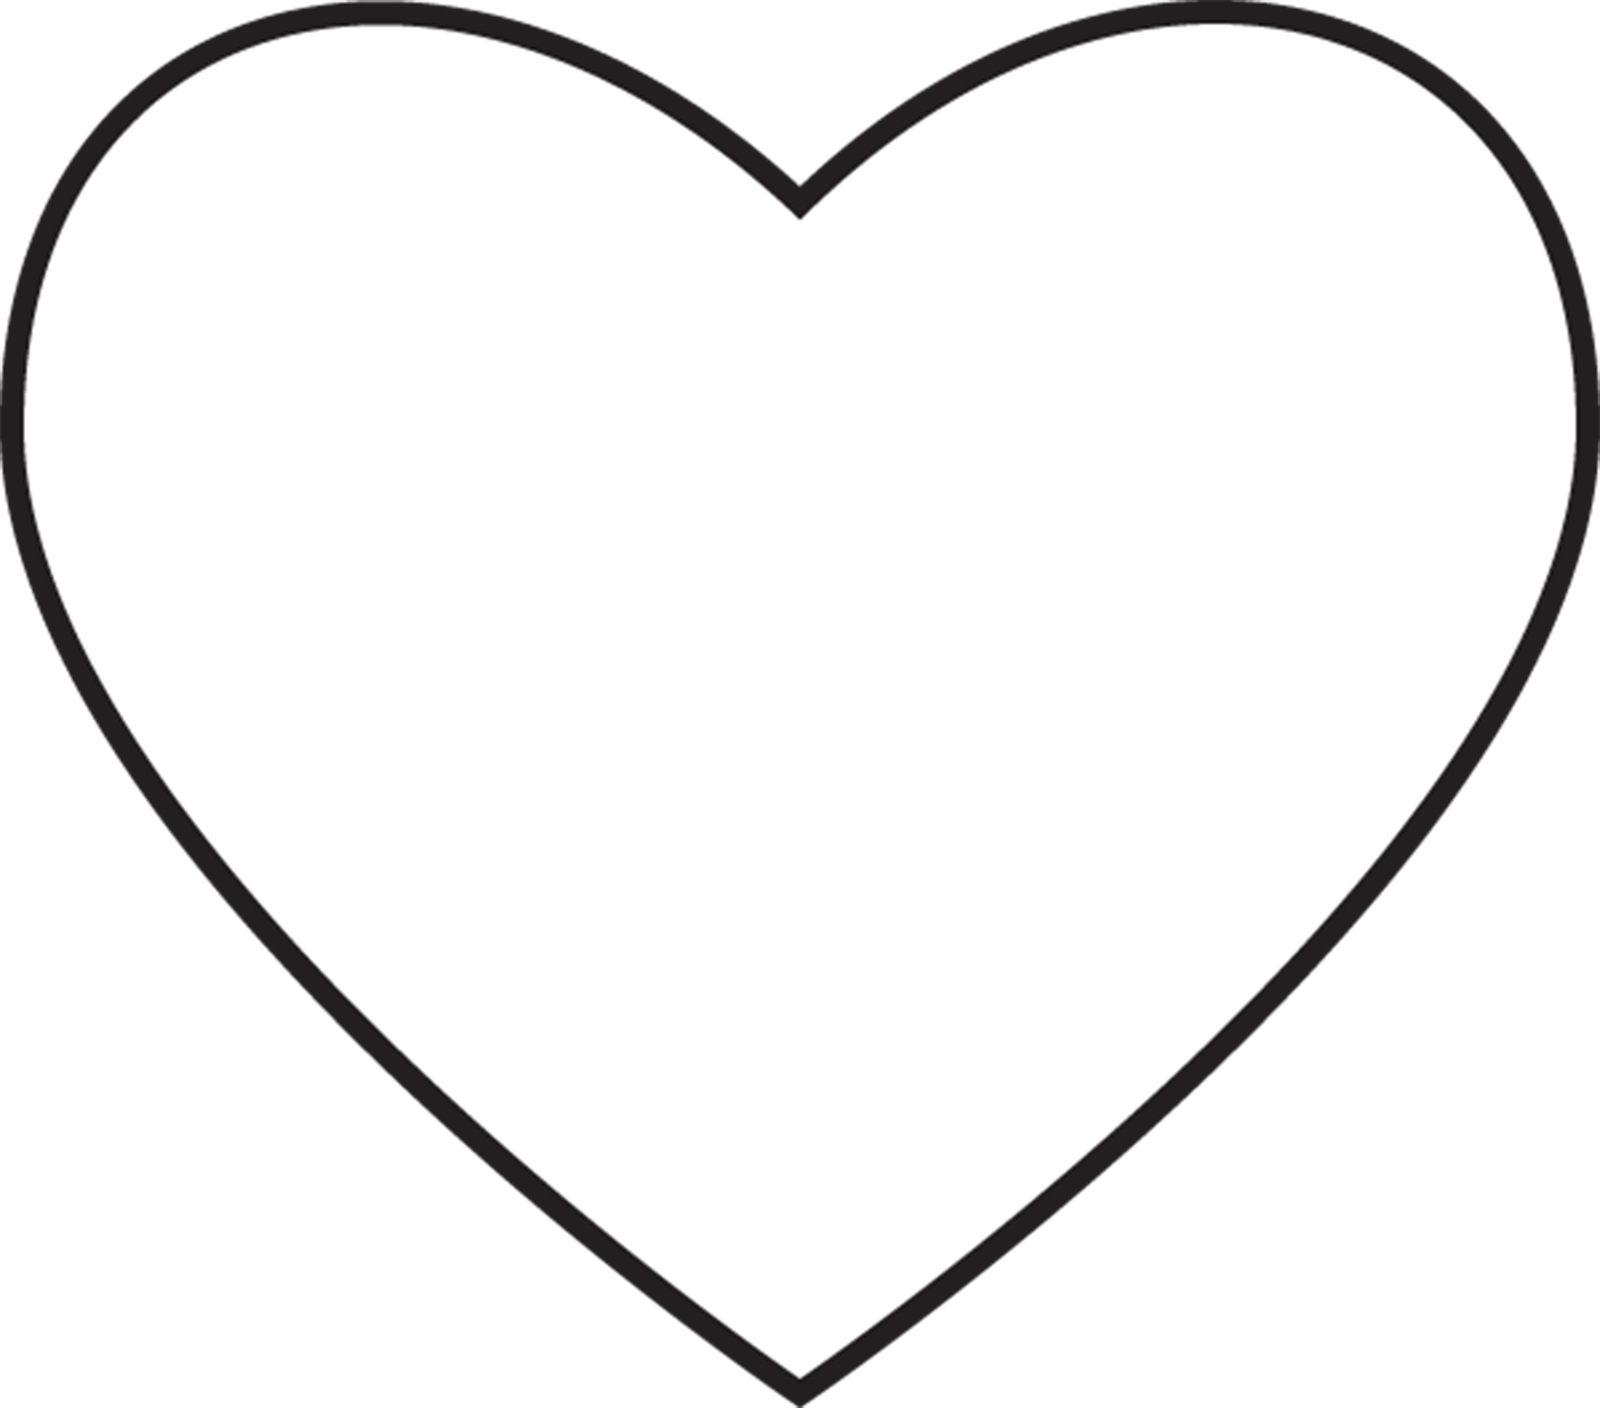 heart-outline-stencil-free-images-at-clker-vector-clip-art